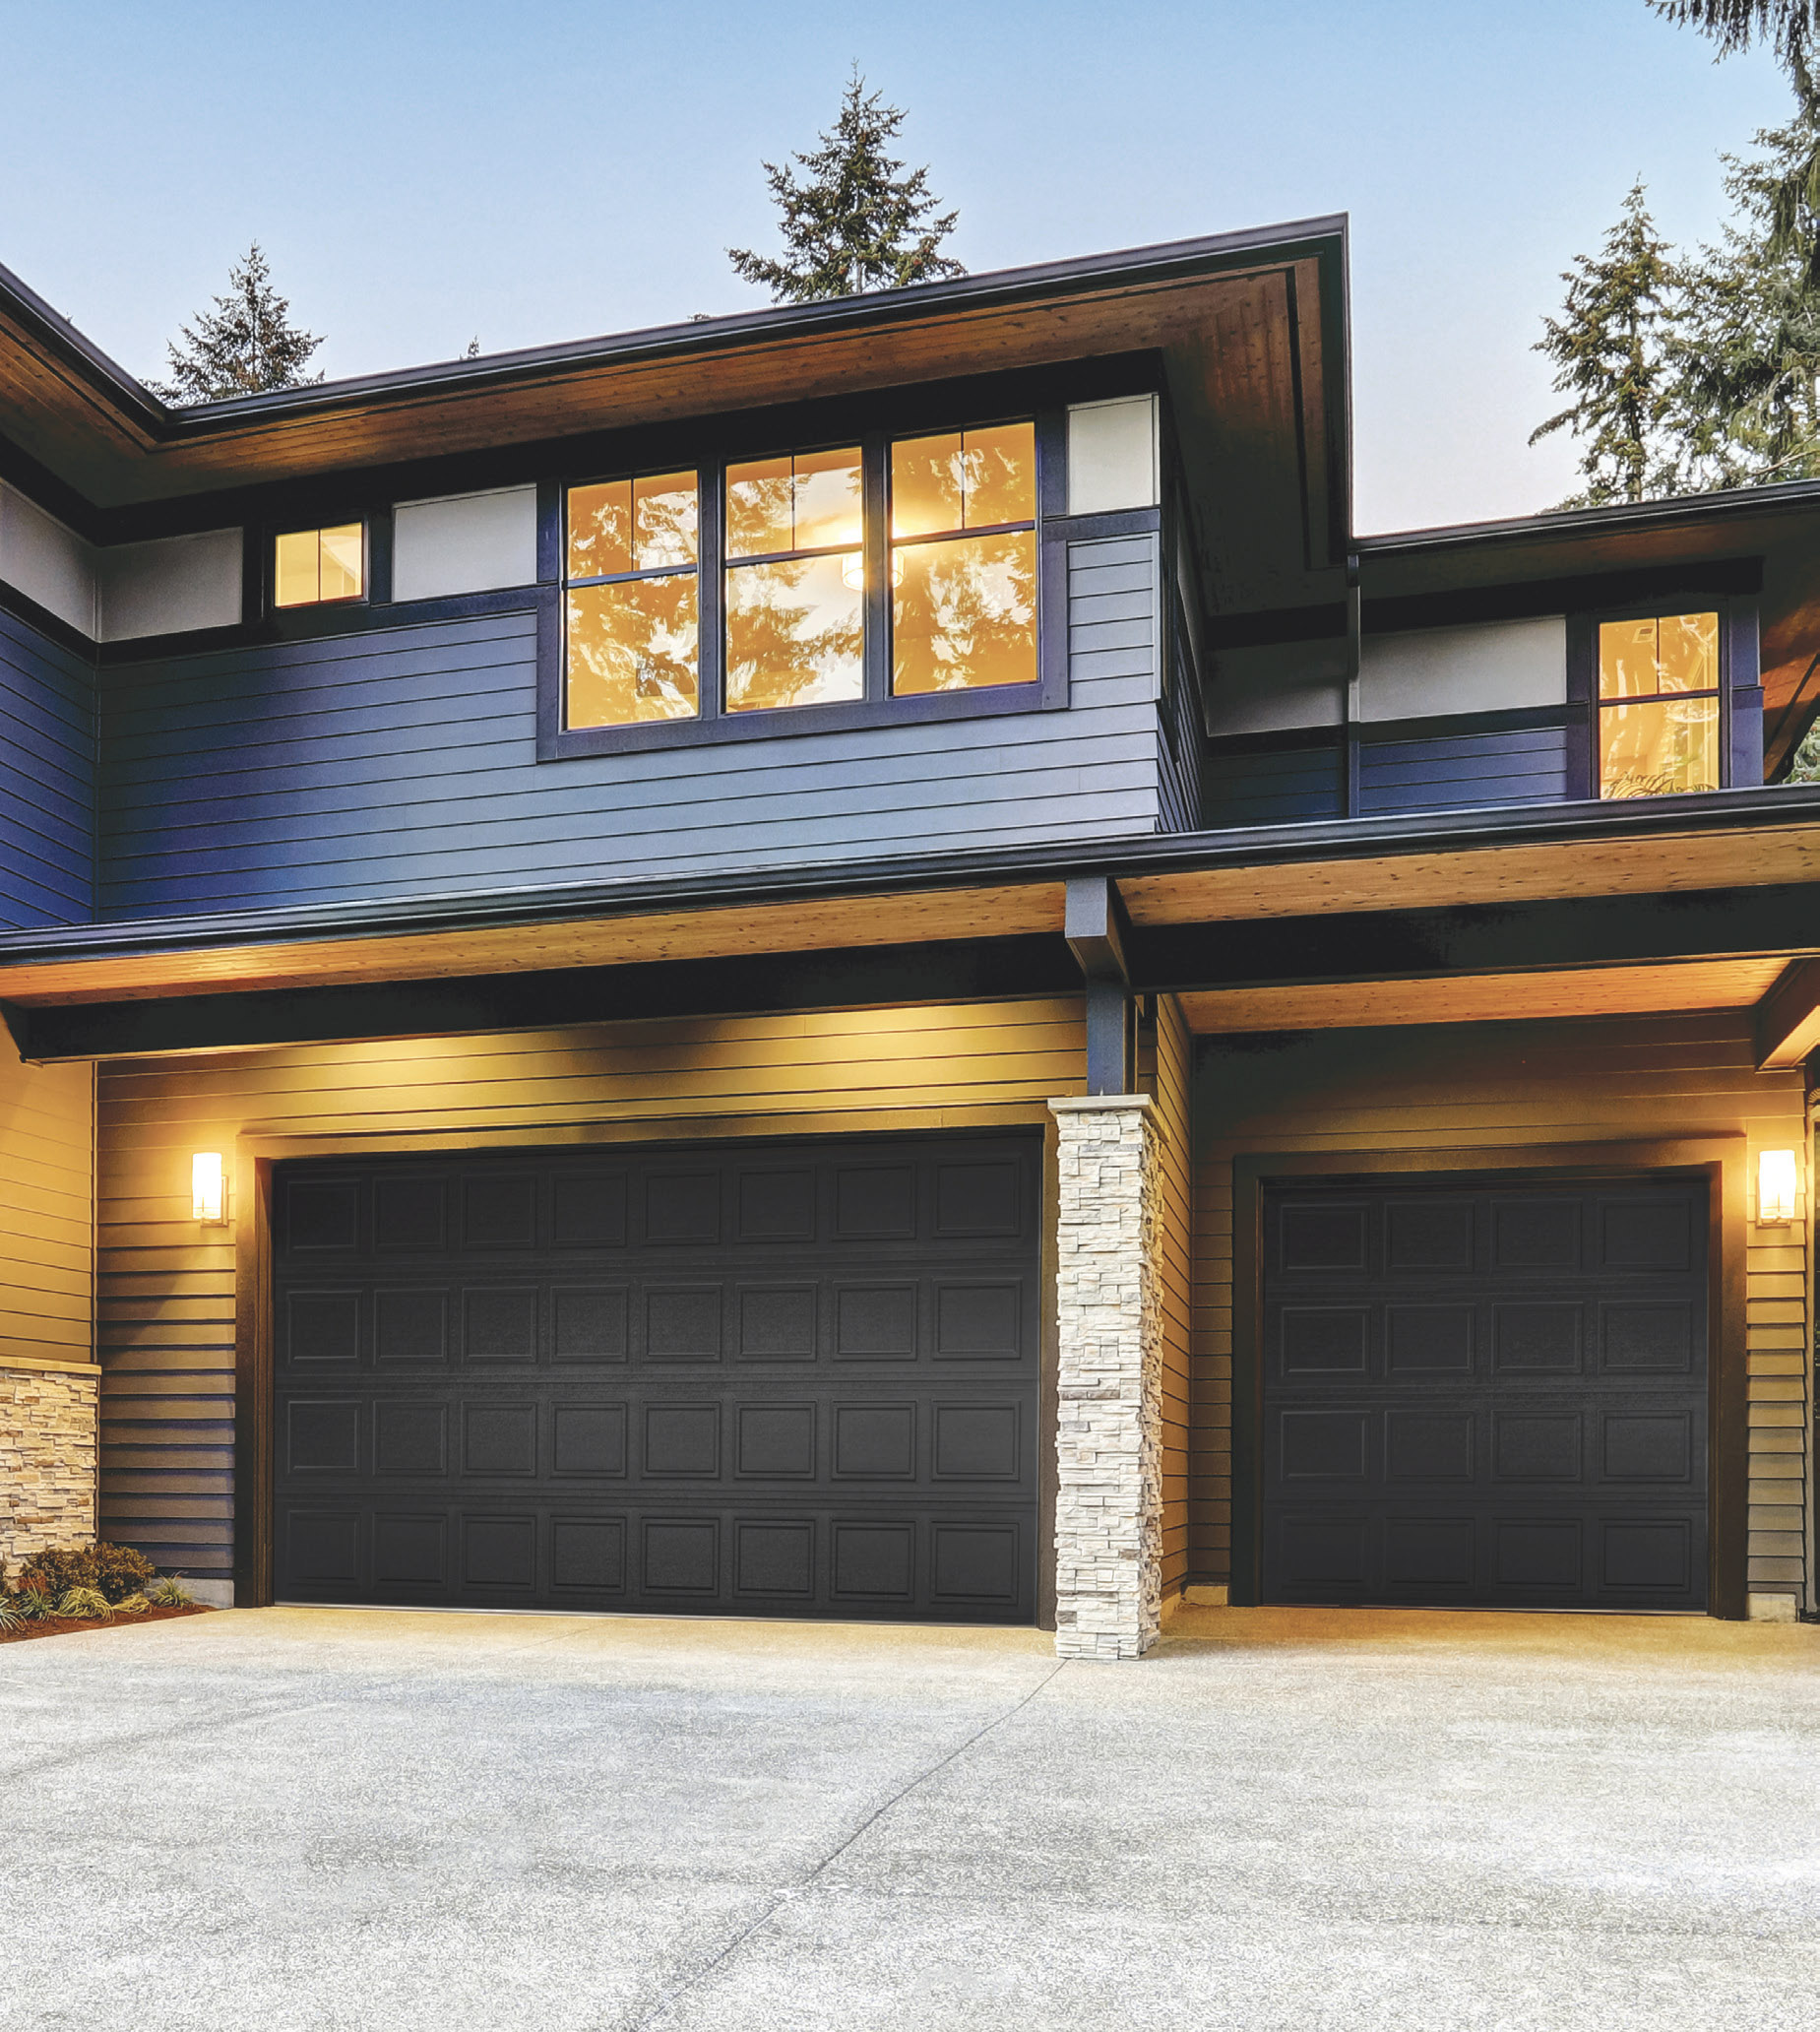  Long Panel Garage Door Images for Small Space